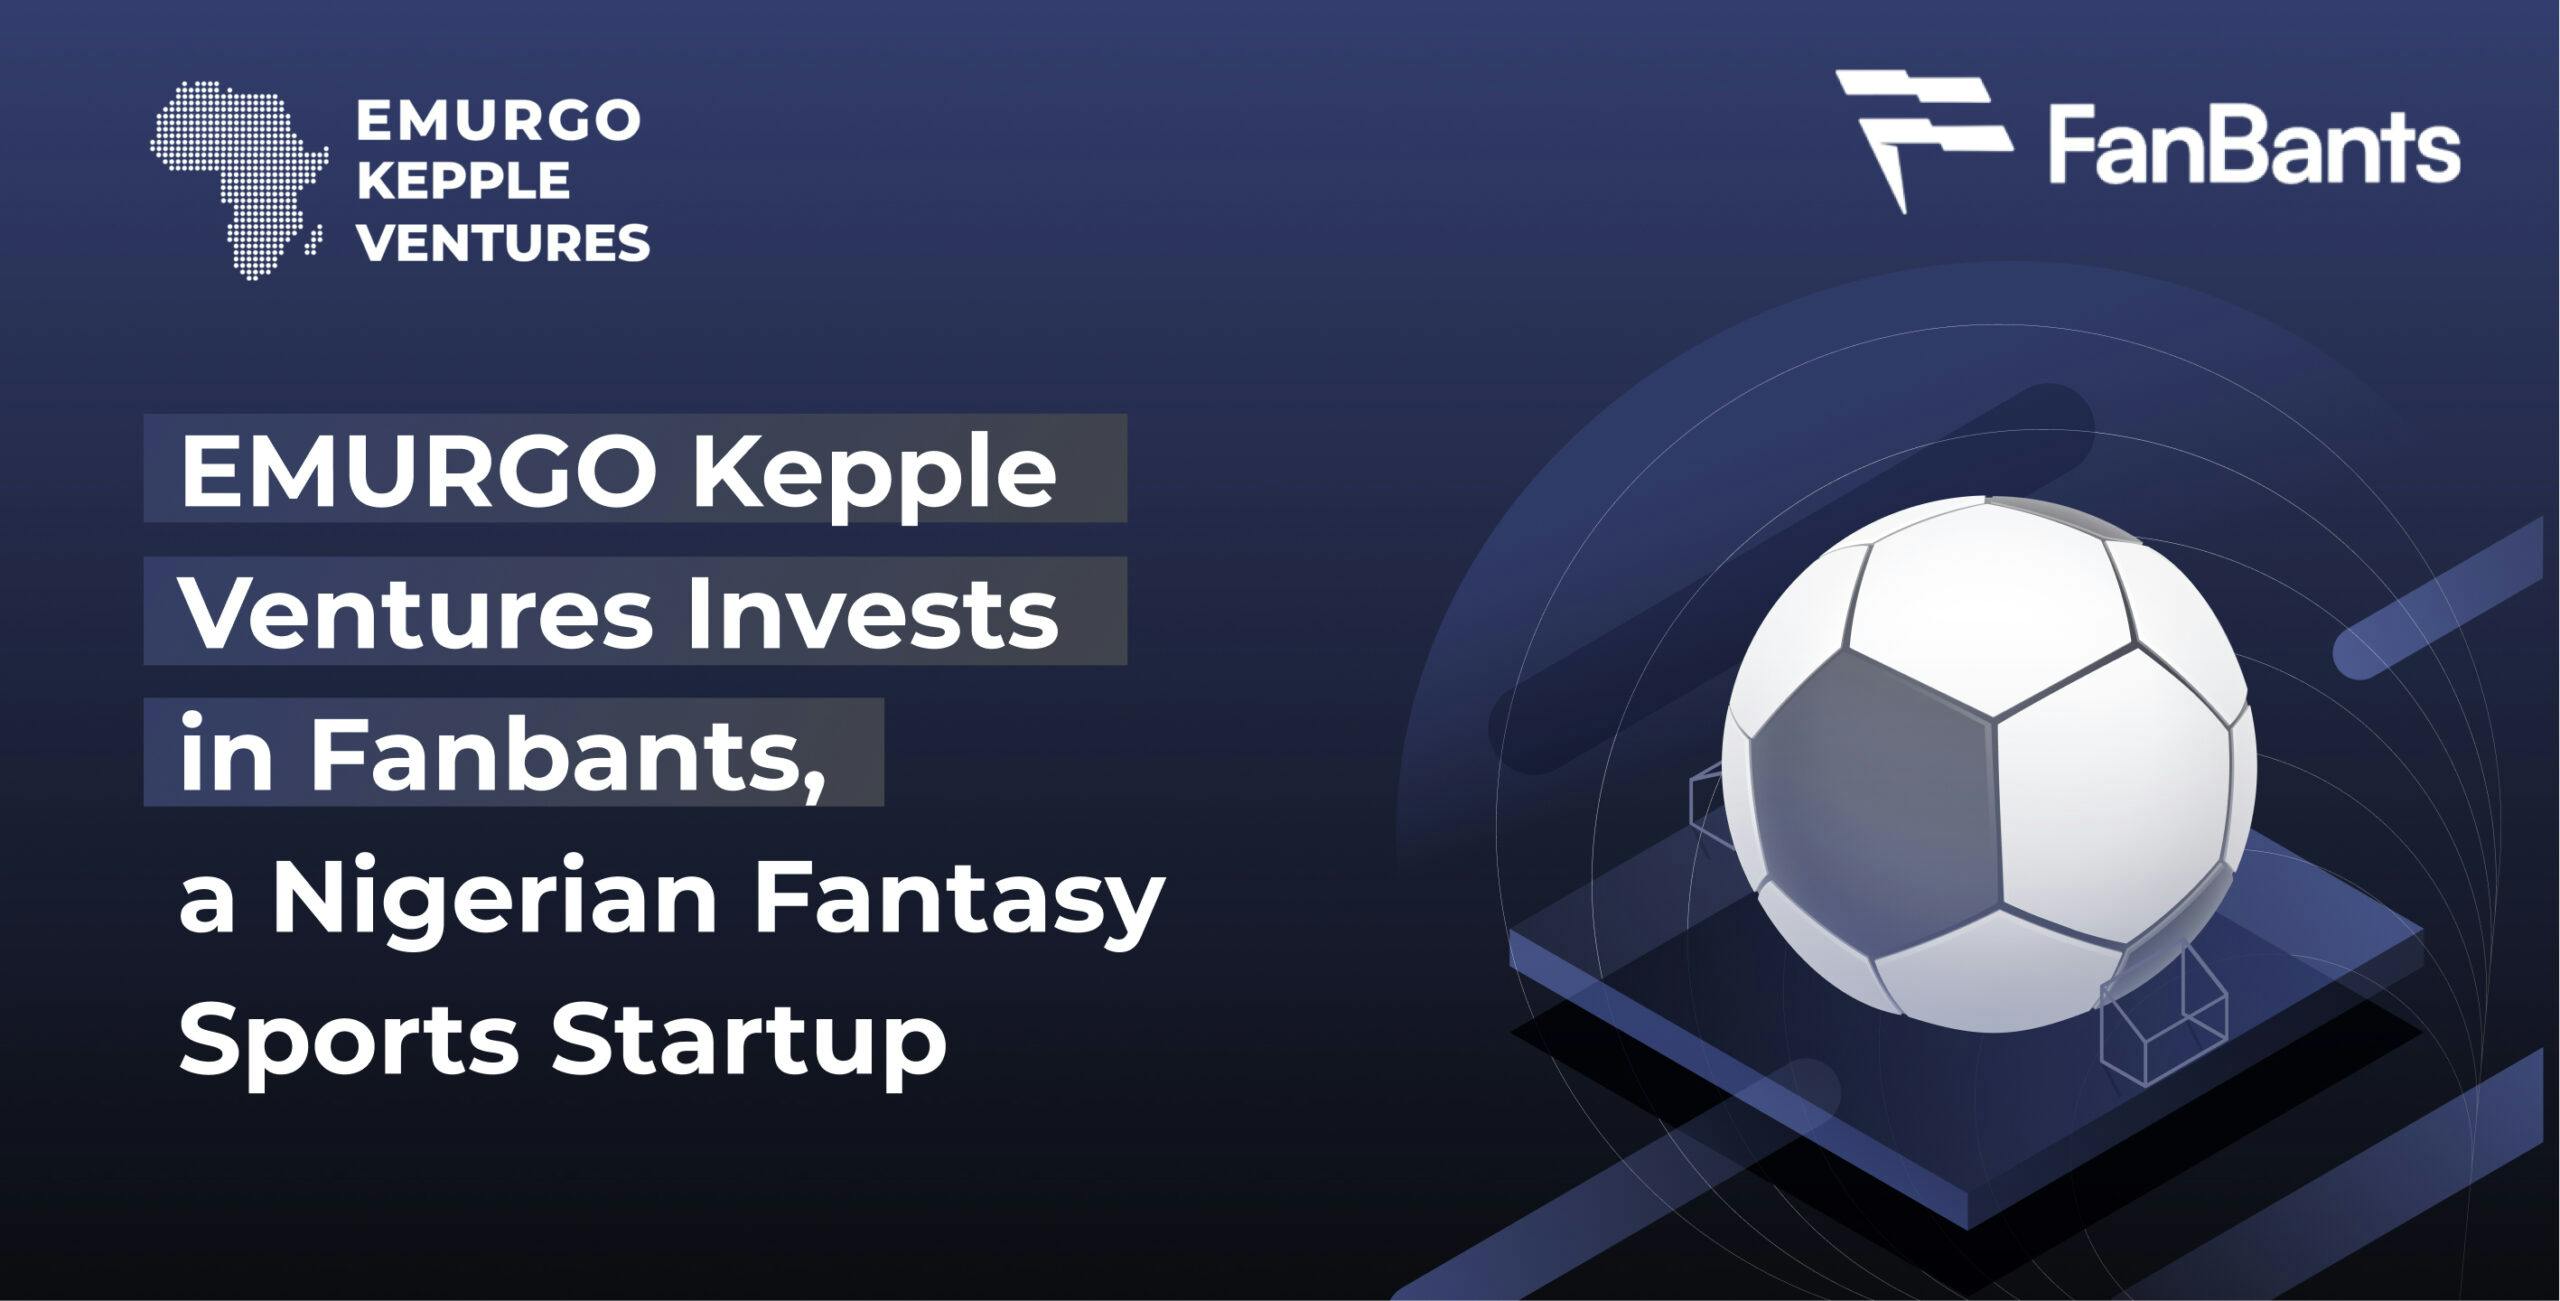 EMURGO-Kepple-Ventures-Announces-First-Investment-in-FanBants-scaled-1.jpg